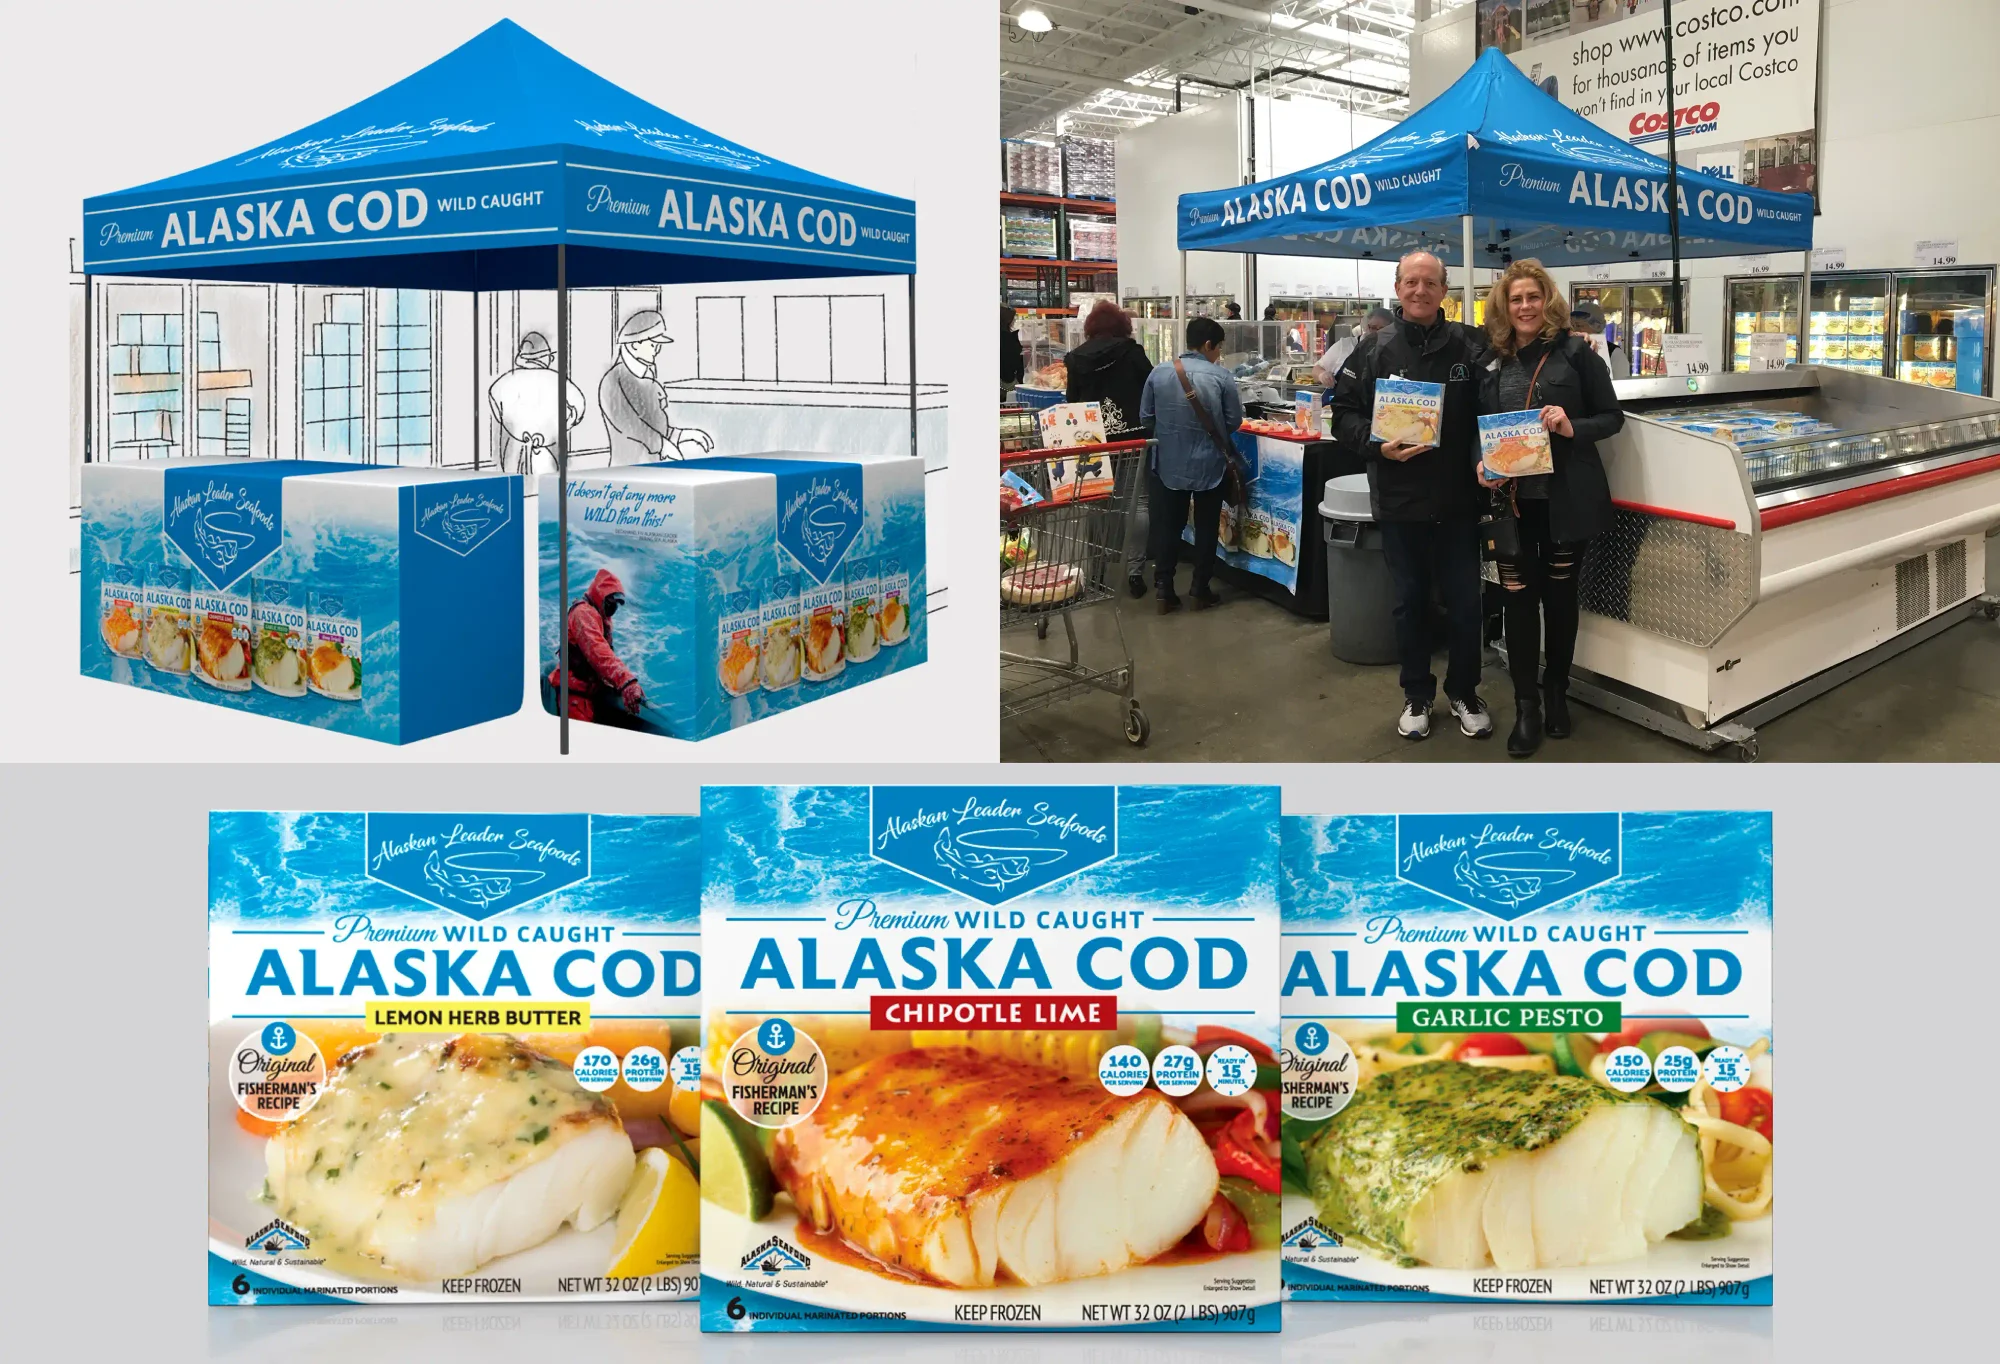 Alaskan Leader Packaging and Expo booth